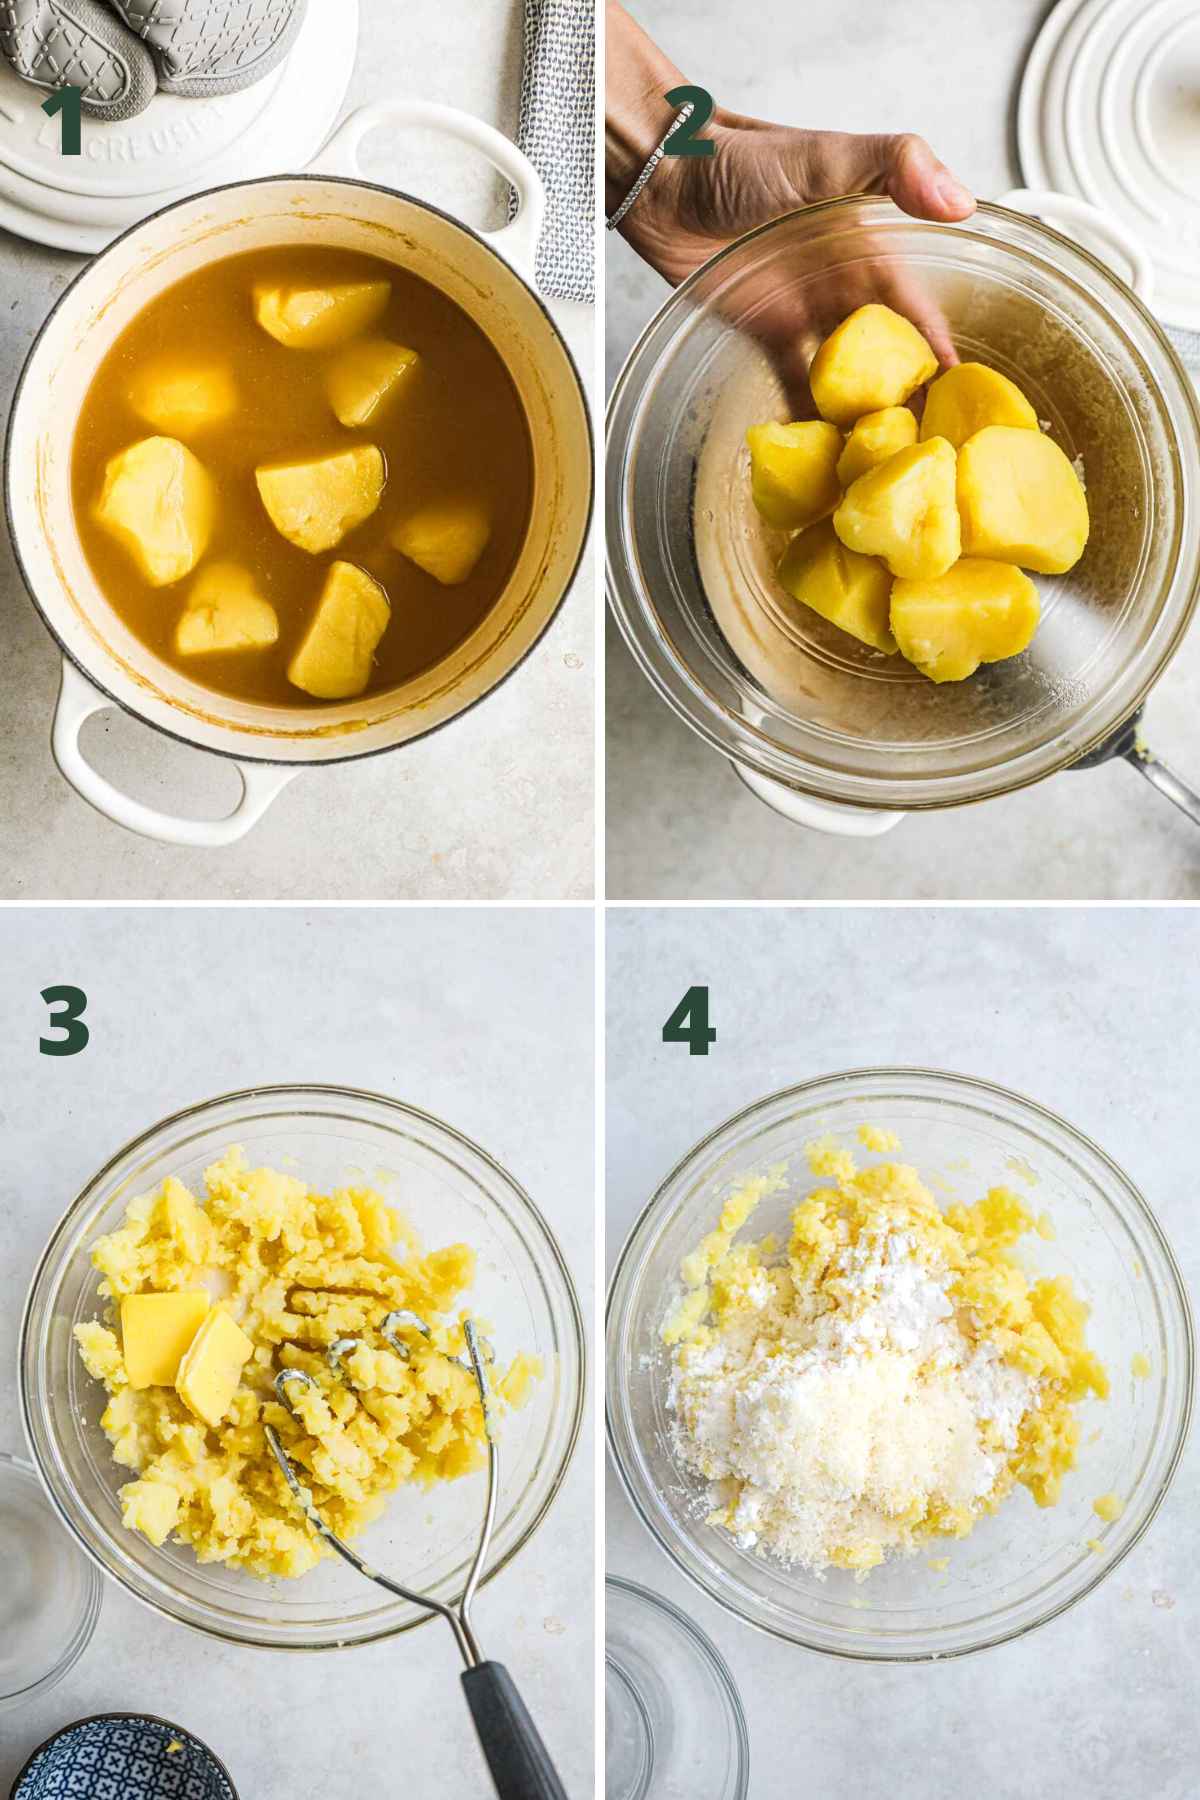 Steps to make fried potato mochi, including boiling potatoes in broth, transferring to bowl, mashing with butter and milk, and adding parmesan and potato starch.